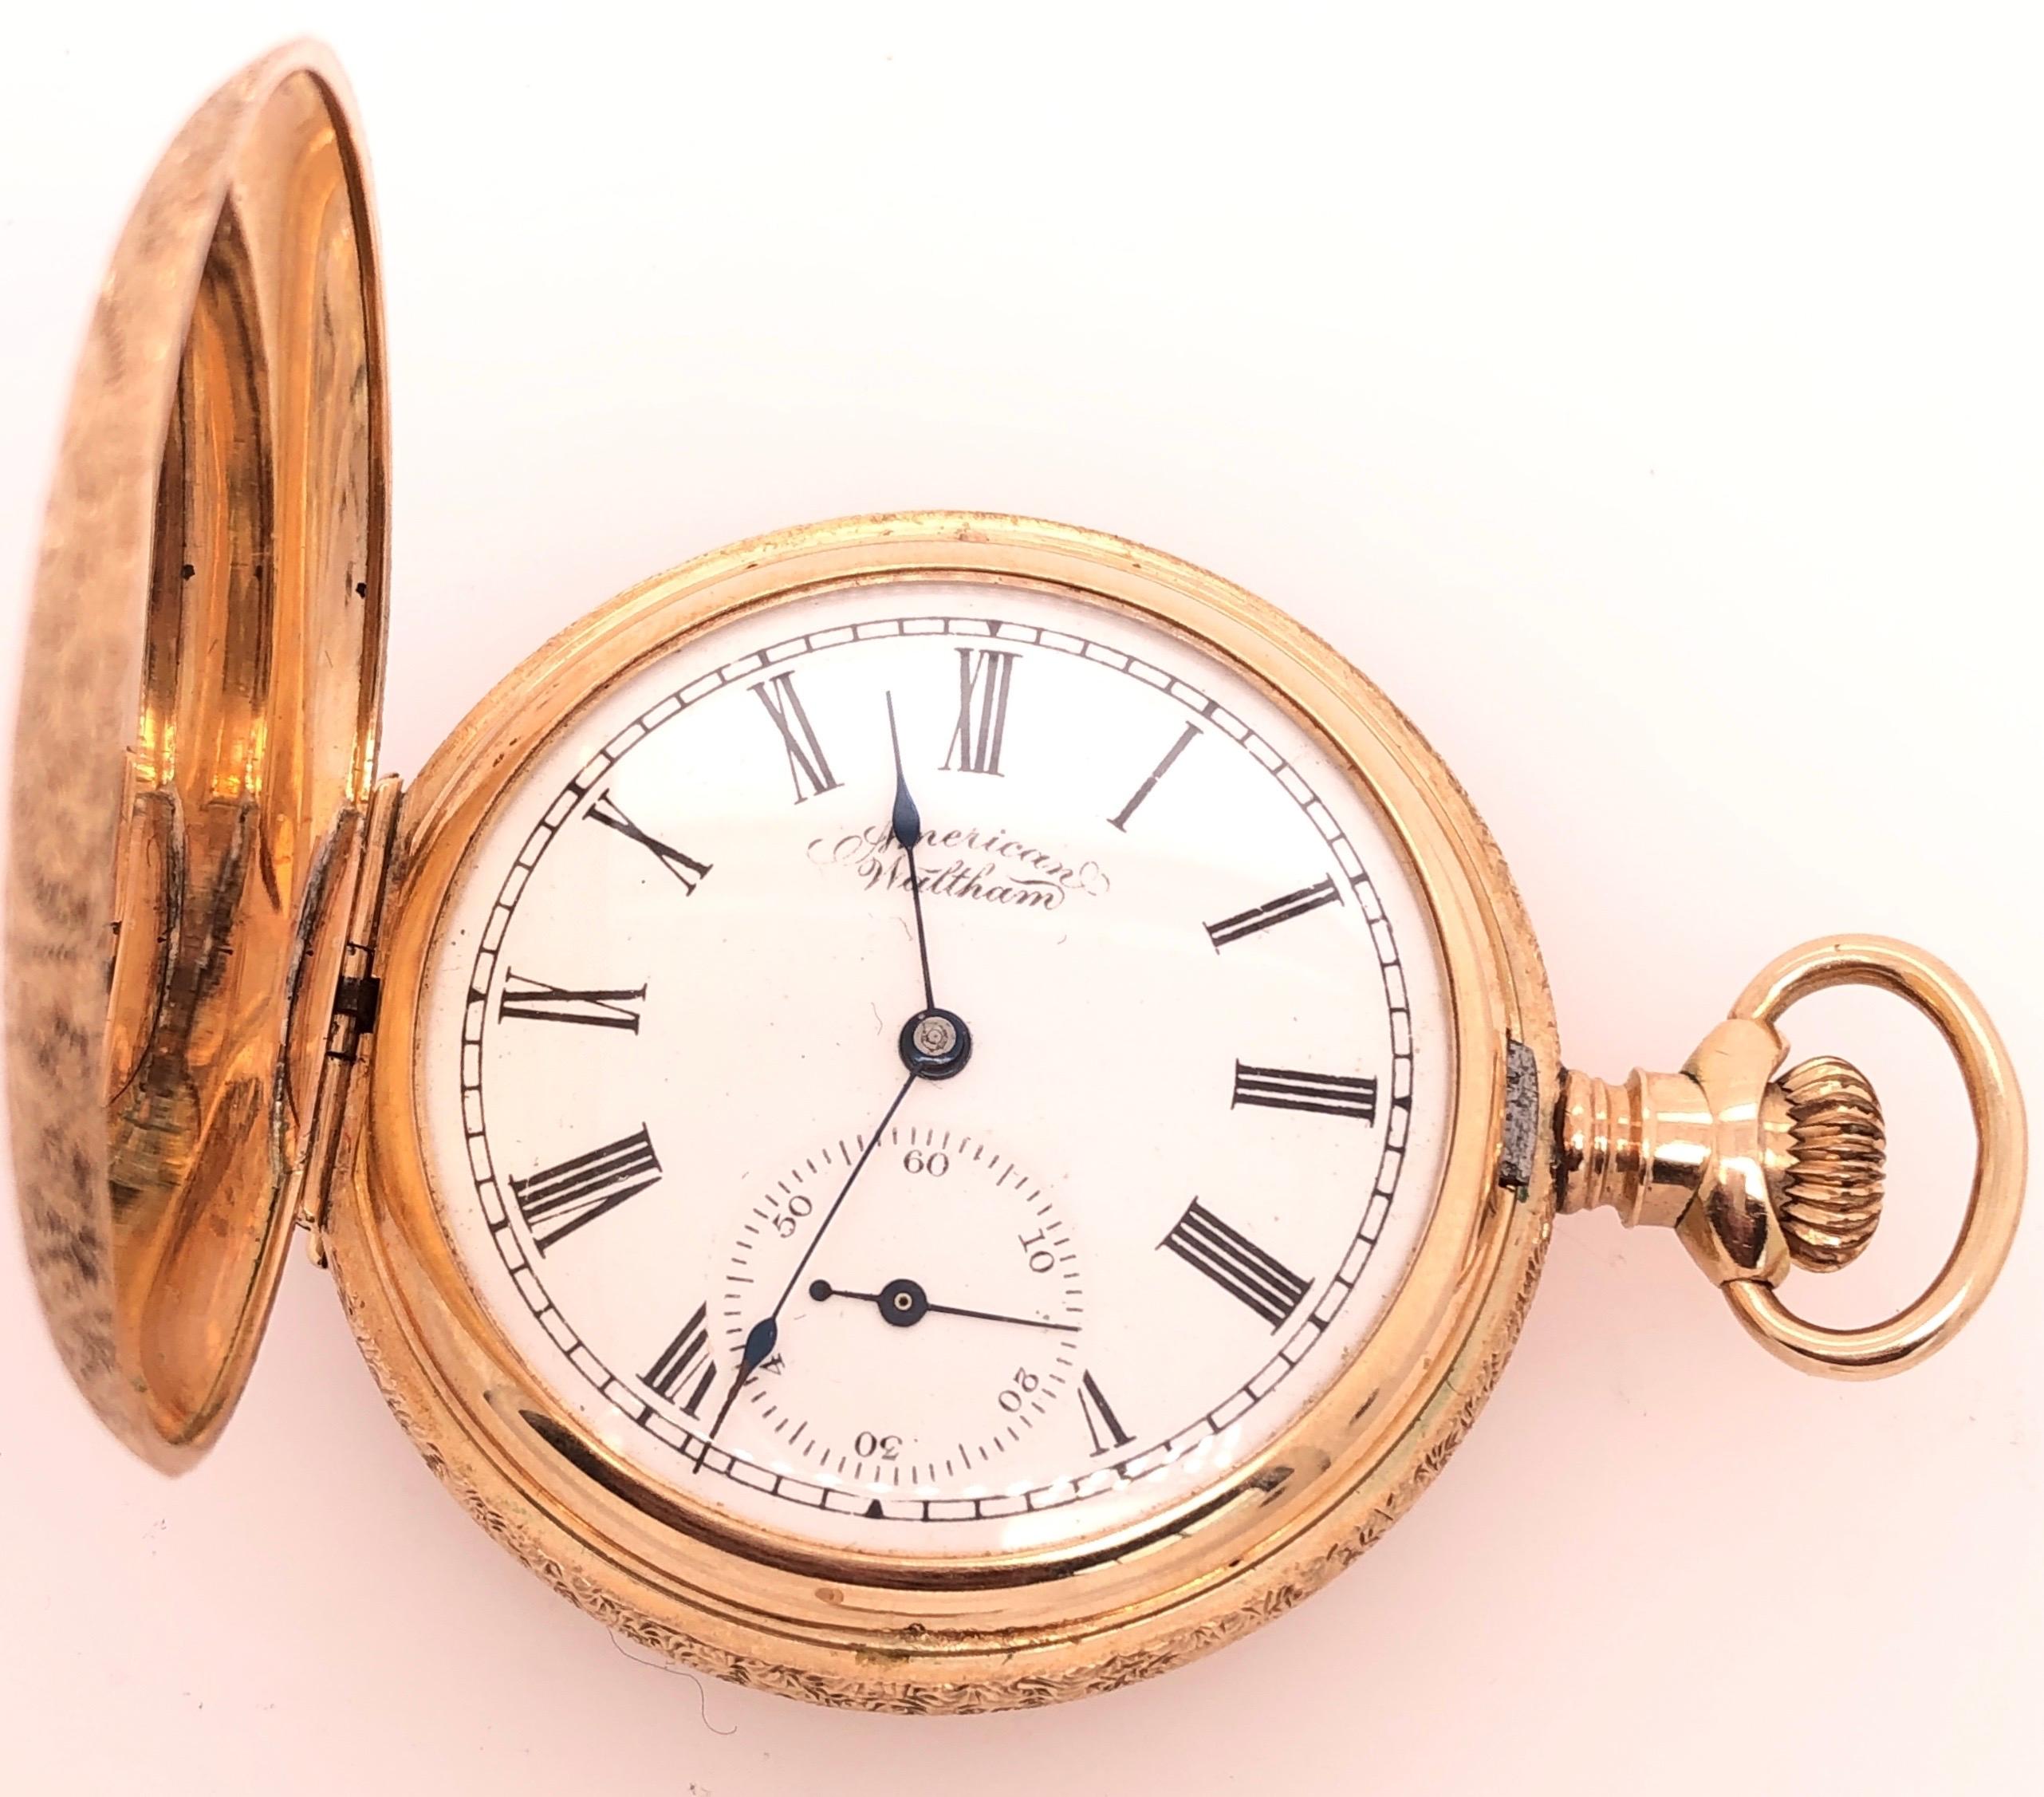  14 Karat Yellow Gold American Waltham Pocket Watch. Serial #133554
Beautiful antique American Waltham pocket watch with white dial having roman numerals including ebony hands and dedicated second dial. Both Sides fully etch decorated. 
40 mm x 40